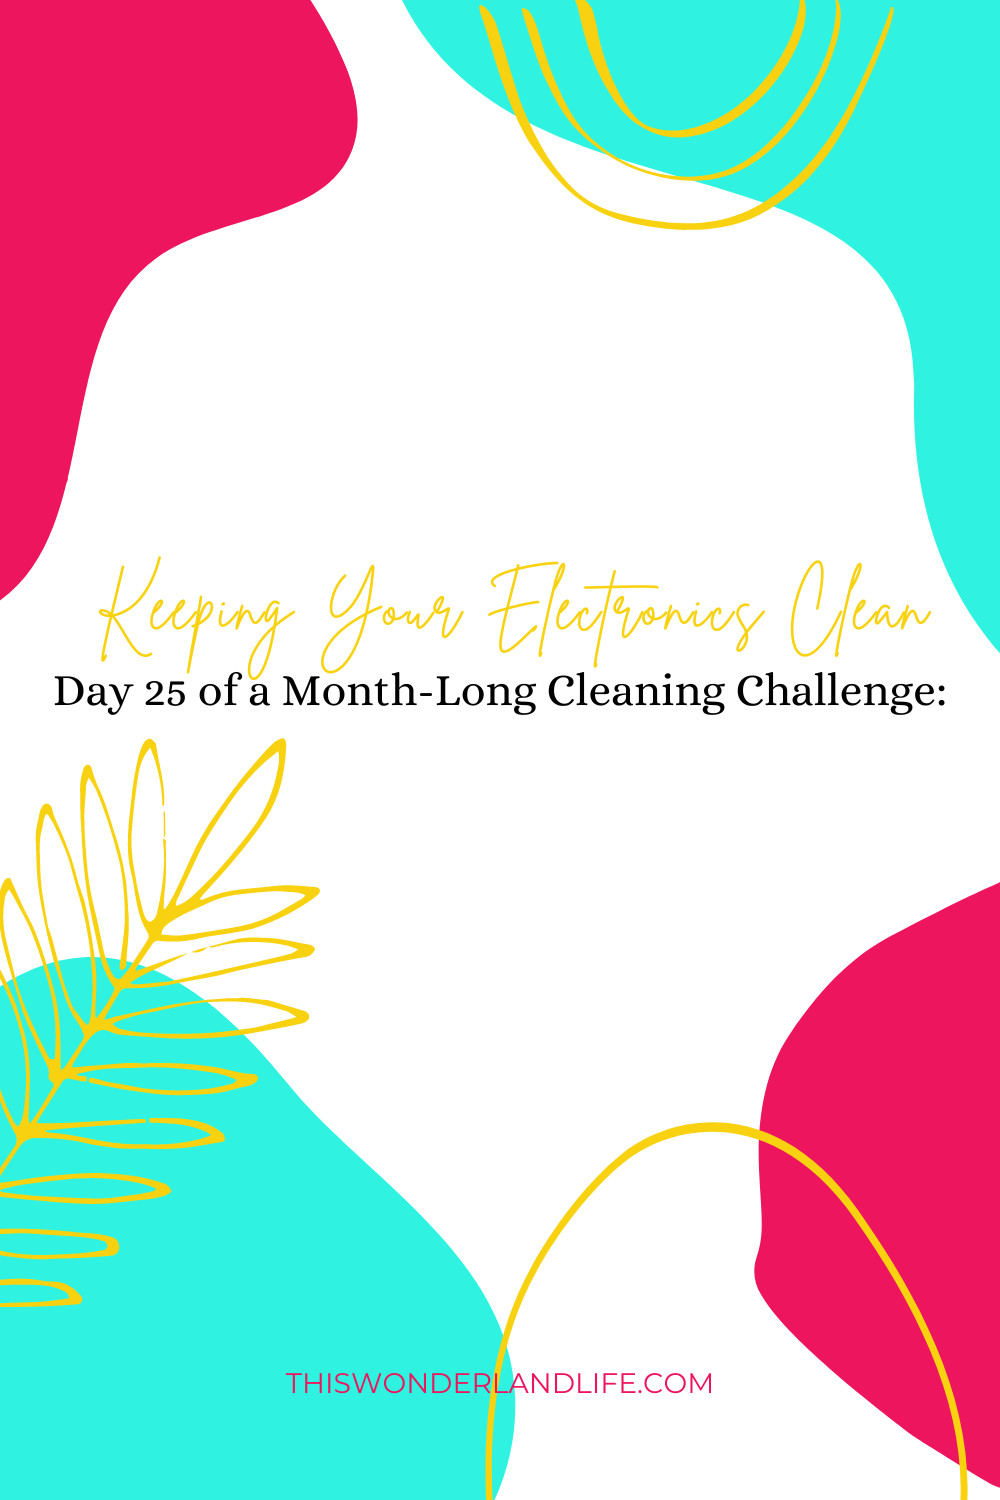 Day 25 of a Month-Long Cleaning Challenge: Keeping Your Electronics Clean